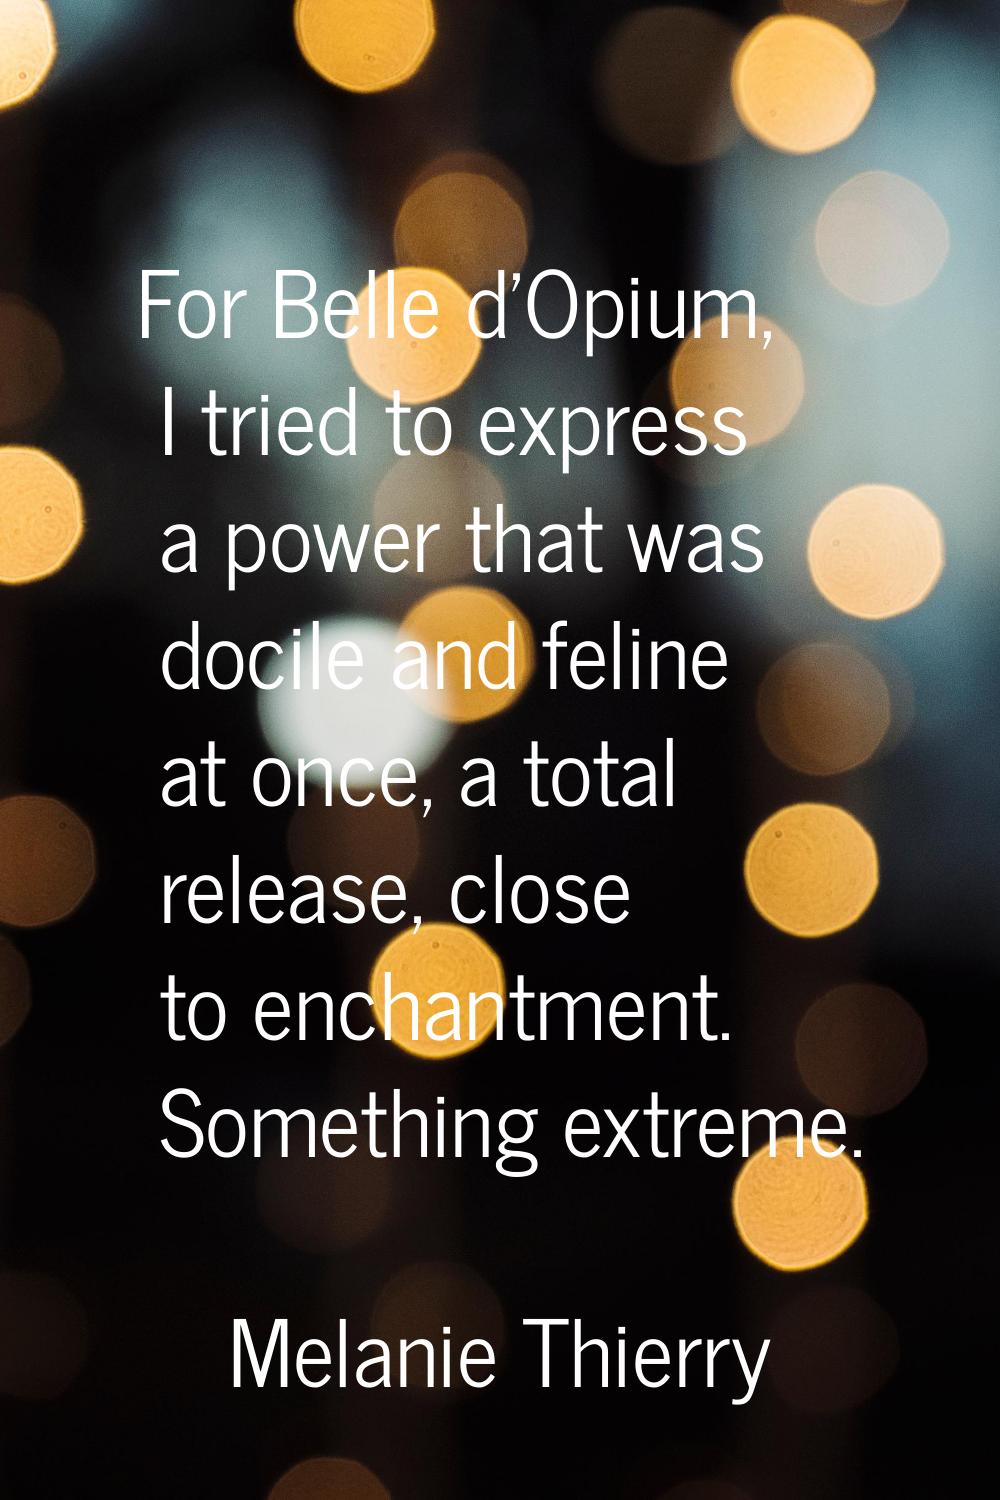 For Belle d'Opium, I tried to express a power that was docile and feline at once, a total release, 